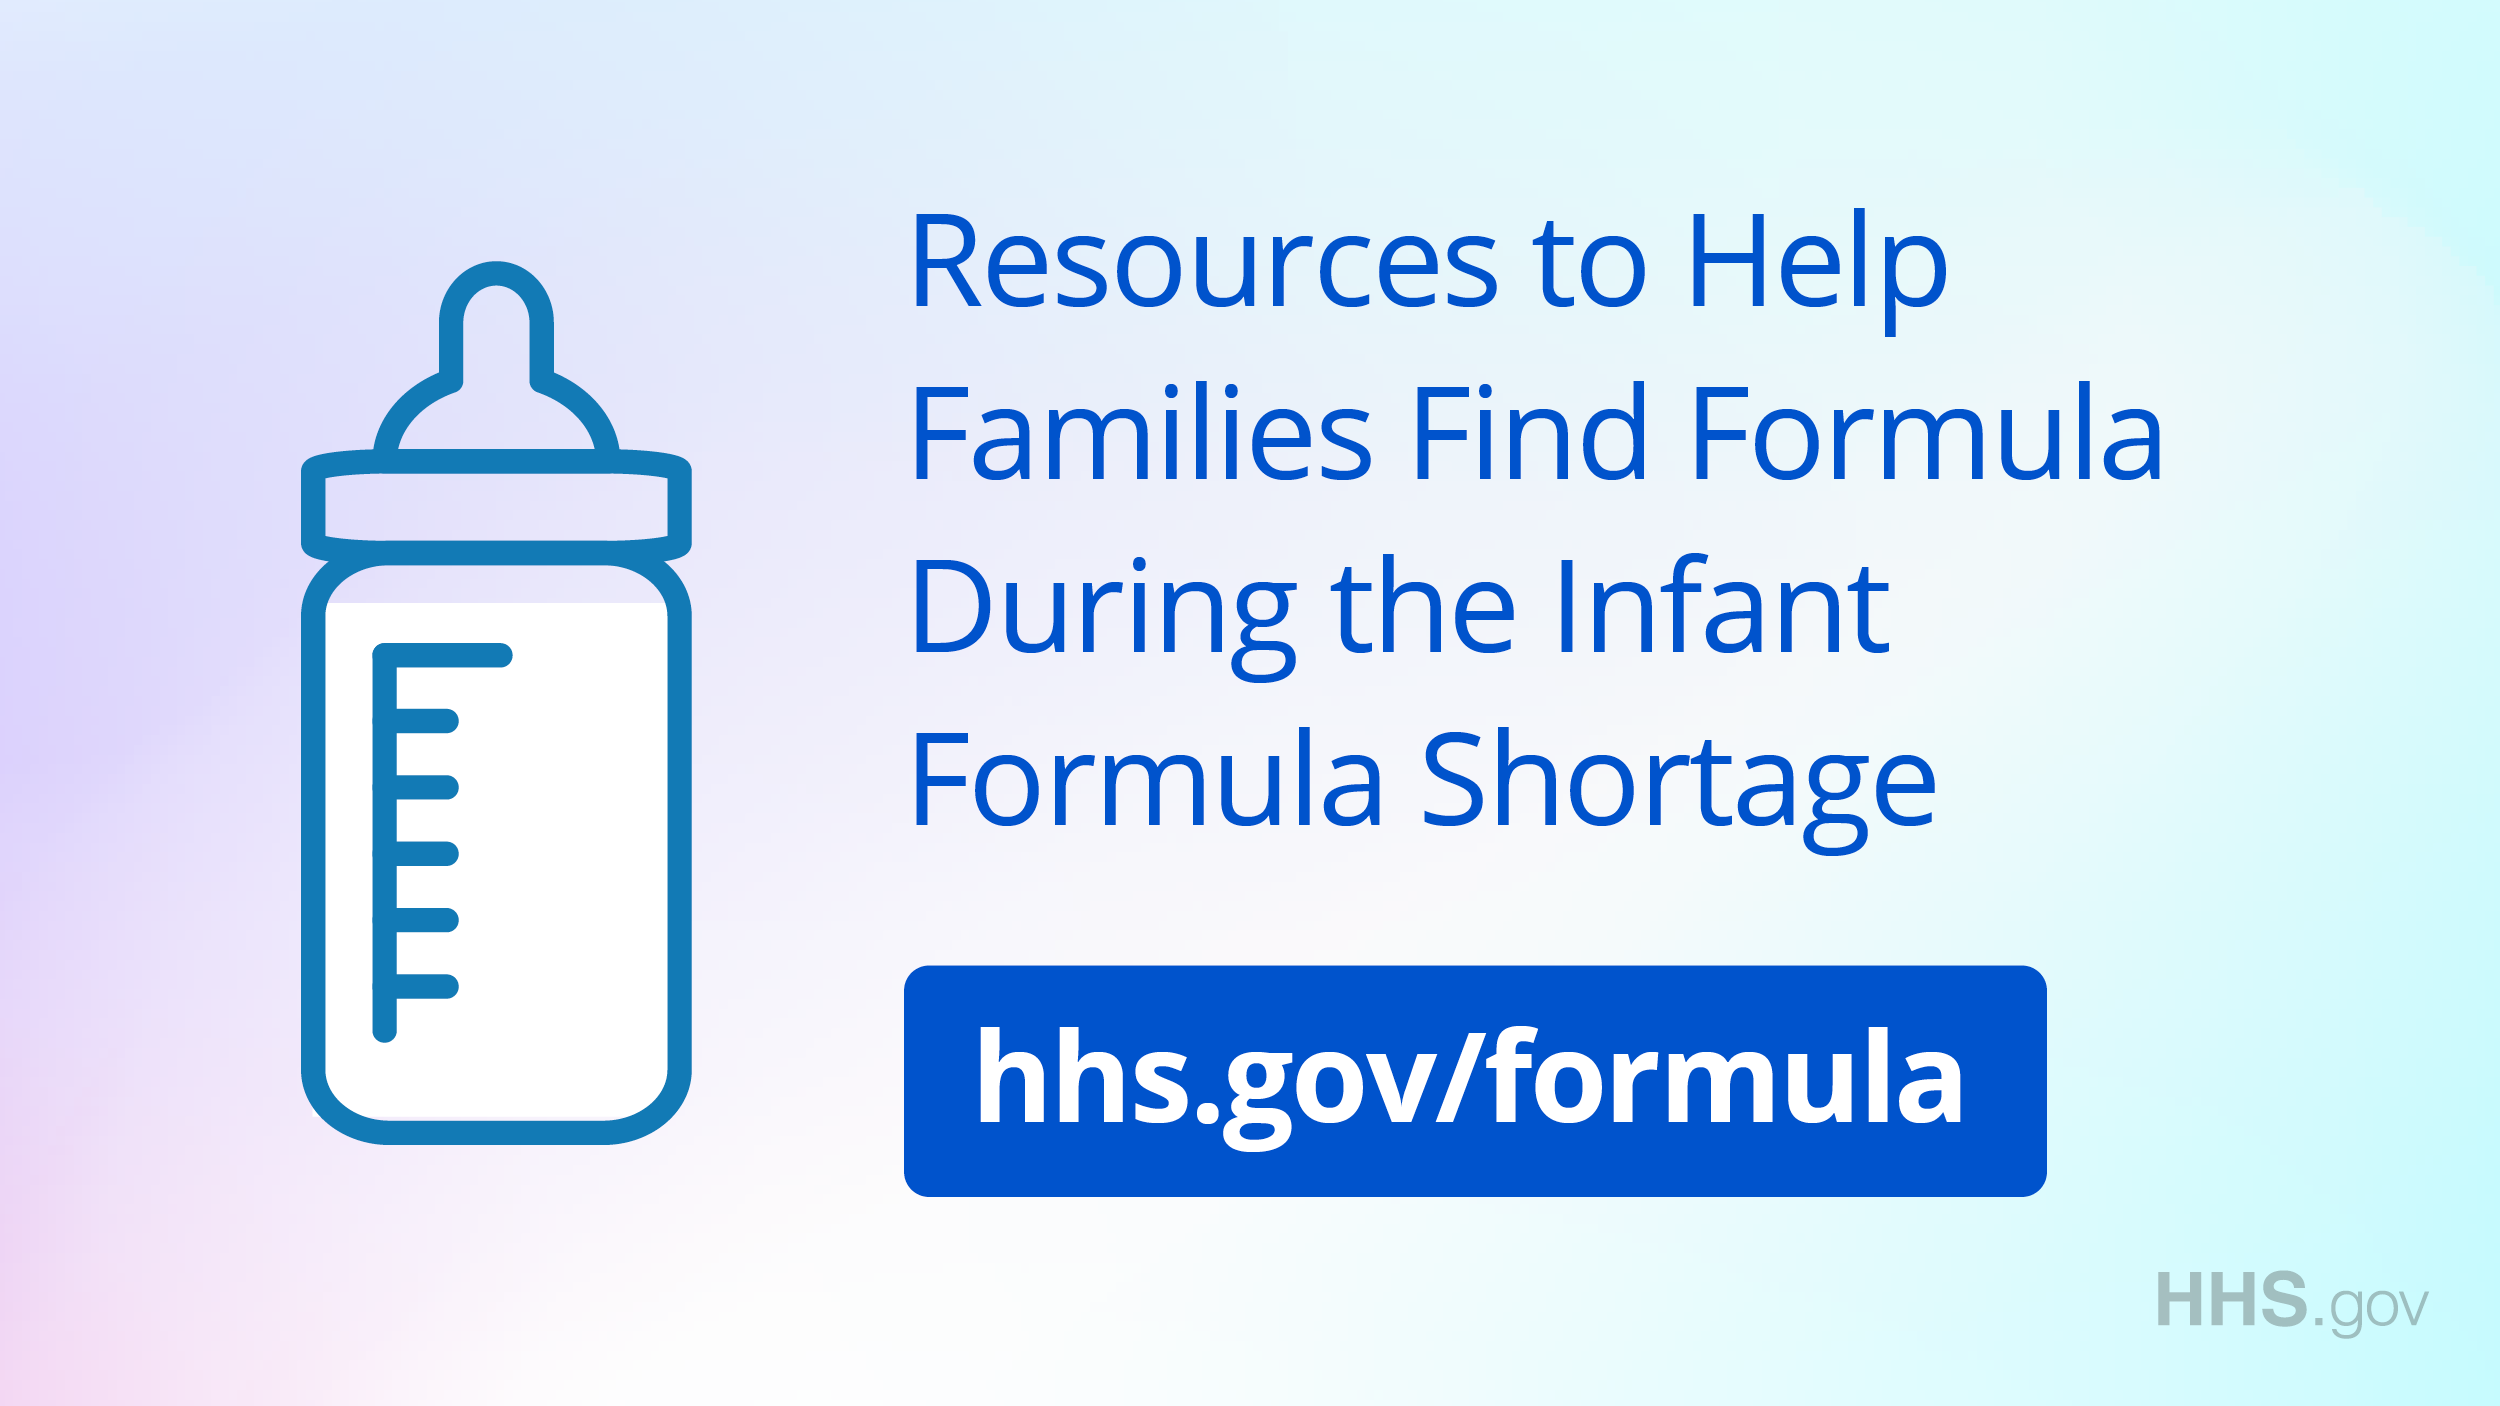 Facebook/Twitter promo graphic to find resources for the infant formula shortage at hhs.gov/formula in English.